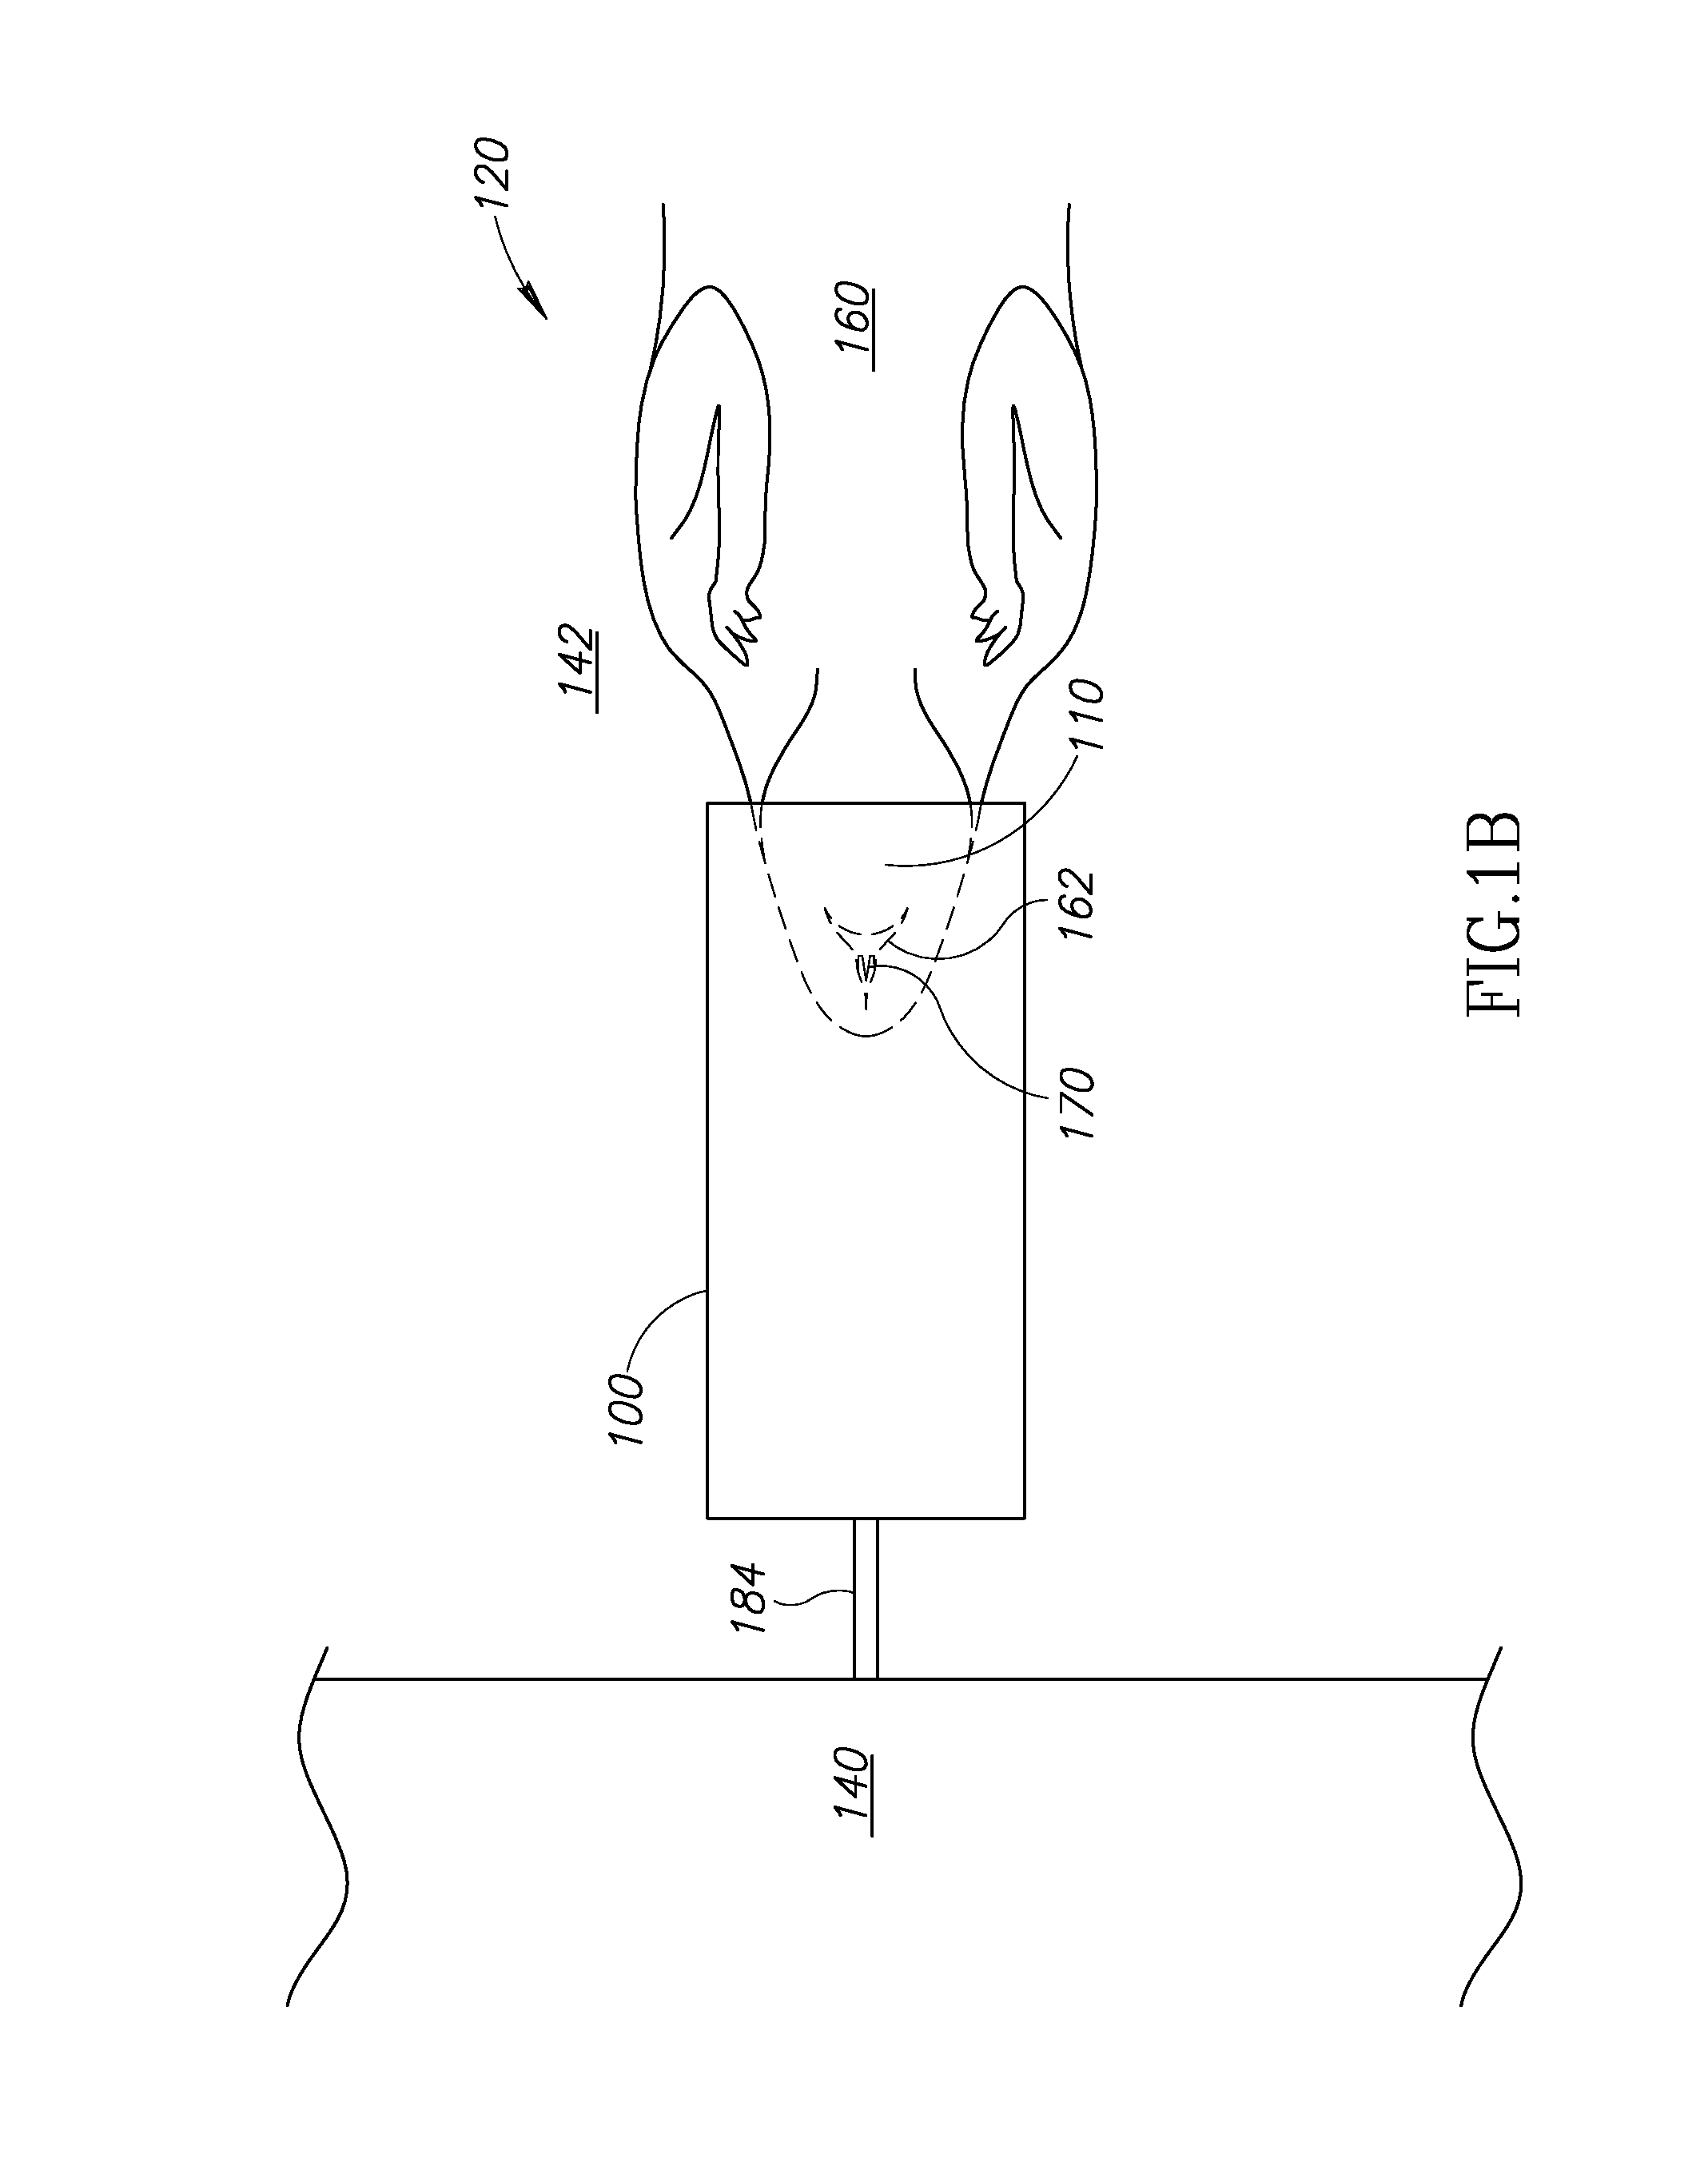 Small animal imaging device